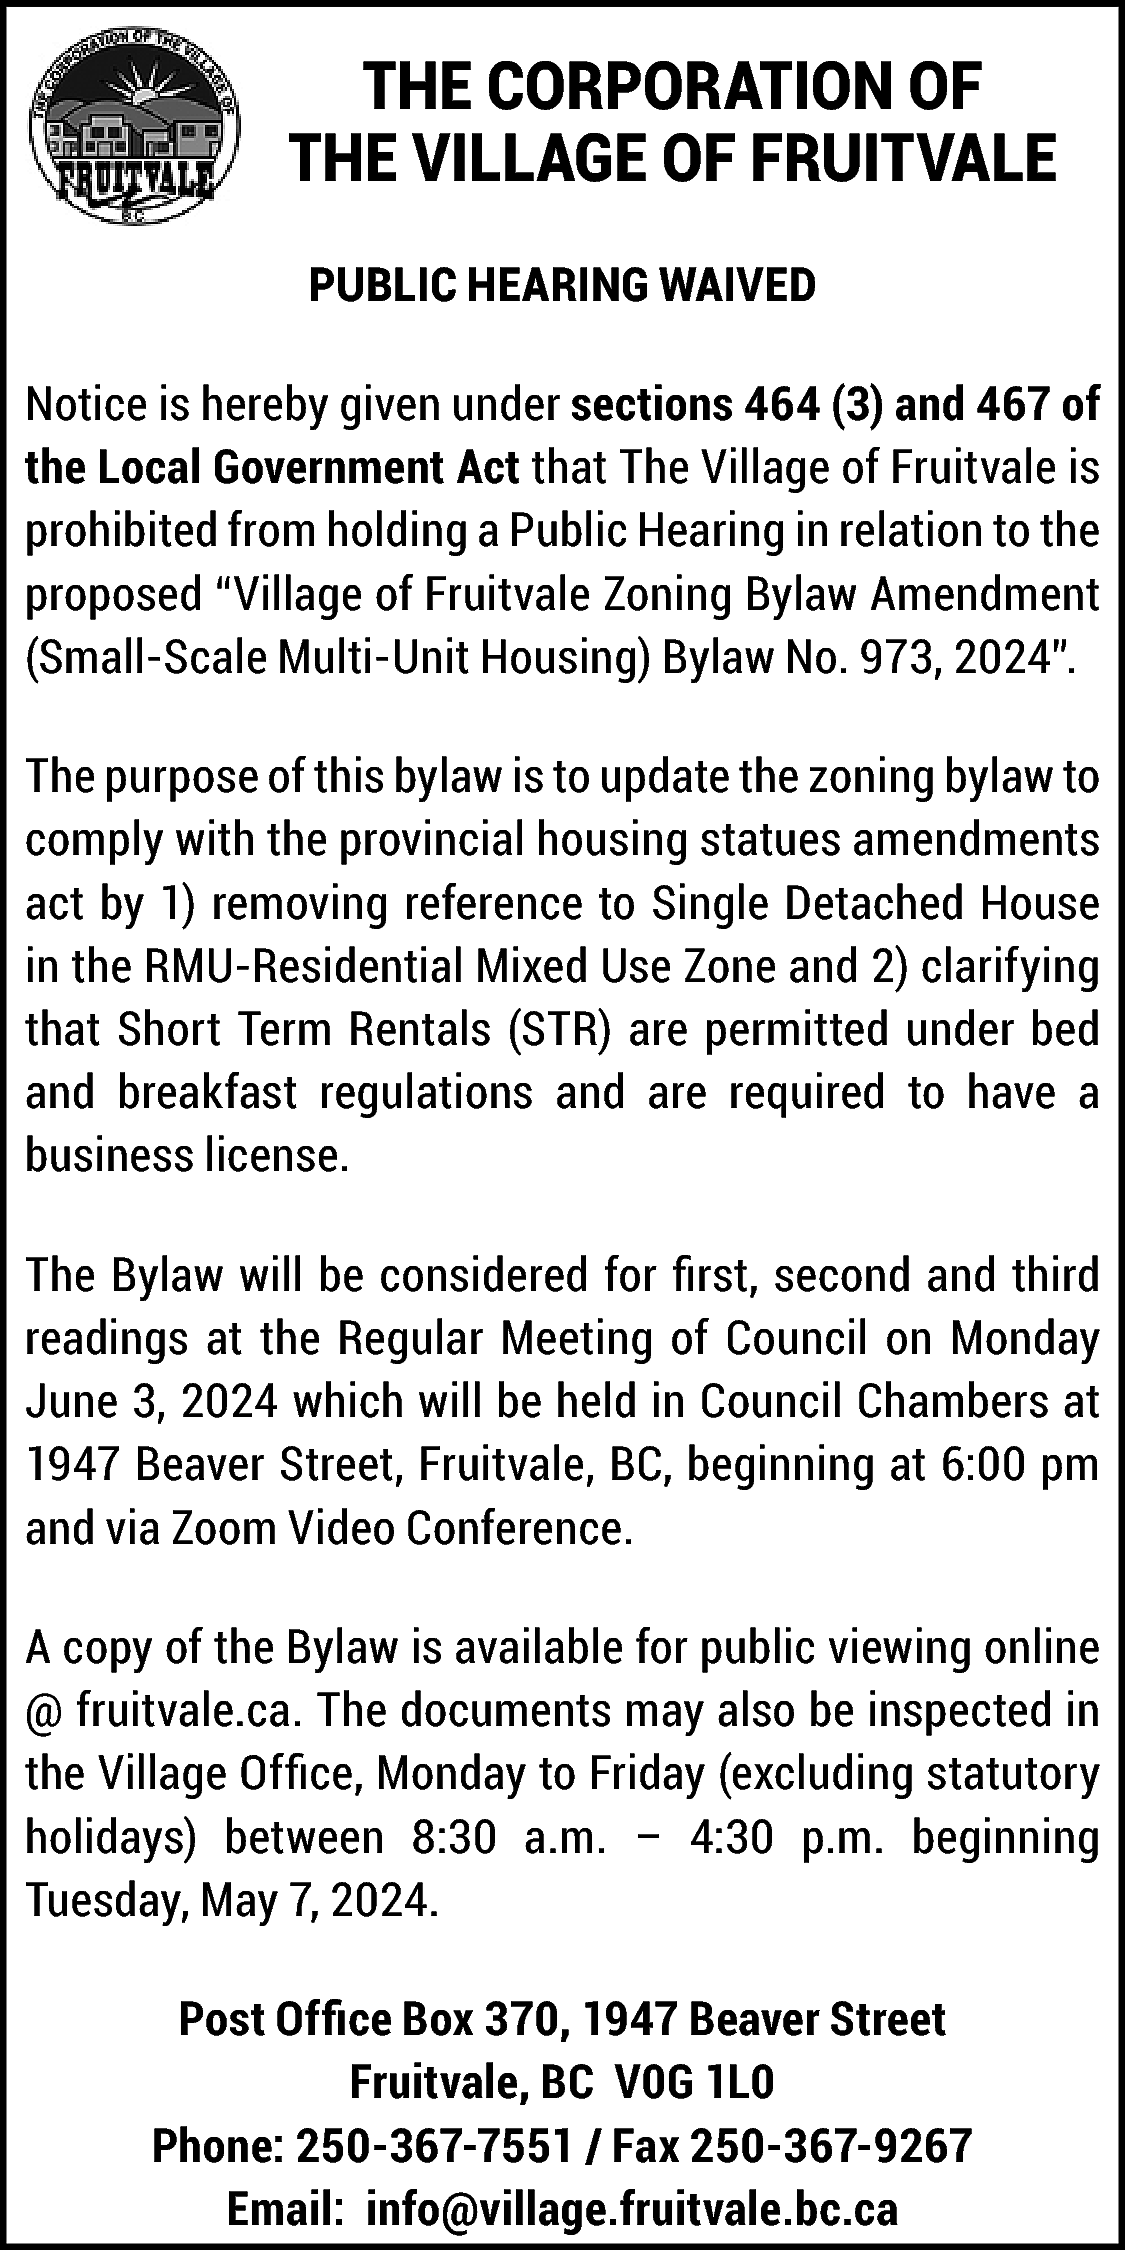 THE CORPORATION OF <br>THE VILLAGE  THE CORPORATION OF  THE VILLAGE OF FRUITVALE  PUBLIC HEARING WAIVED  Notice is hereby given under sections 464 (3) and 467 of  the Local Government Act that The Village of Fruitvale is  prohibited from holding a Public Hearing in relation to the  proposed “Village of Fruitvale Zoning Bylaw Amendment  (Small-Scale Multi-Unit Housing) Bylaw No. 973, 2024”.  The purpose of this bylaw is to update the zoning bylaw to  comply with the provincial housing statues amendments  act by 1) removing reference to Single Detached House  in the RMU-Residential Mixed Use Zone and 2) clarifying  that Short Term Rentals (STR) are permitted under bed  and breakfast regulations and are required to have a  business license.  The Bylaw will be considered for first, second and third  readings at the Regular Meeting of Council on Monday  June 3, 2024 which will be held in Council Chambers at  1947 Beaver Street, Fruitvale, BC, beginning at 6:00 pm  and via Zoom Video Conference.  A copy of the Bylaw is available for public viewing online  @ fruitvale.ca. The documents may also be inspected in  https://fruitvale.ca/  the Village Office, Monday to Friday (excluding statutory  holidays) between 8:30 a.m. – 4:30 p.m. beginning  Tuesday, May 7, 2024.  Post Office Box 370, 1947 Beaver Street  Fruitvale, BC V0G 1L0  Phone: 250-367-7551 / Fax 250-367-9267  Email: info@village.fruitvale.bc.ca    